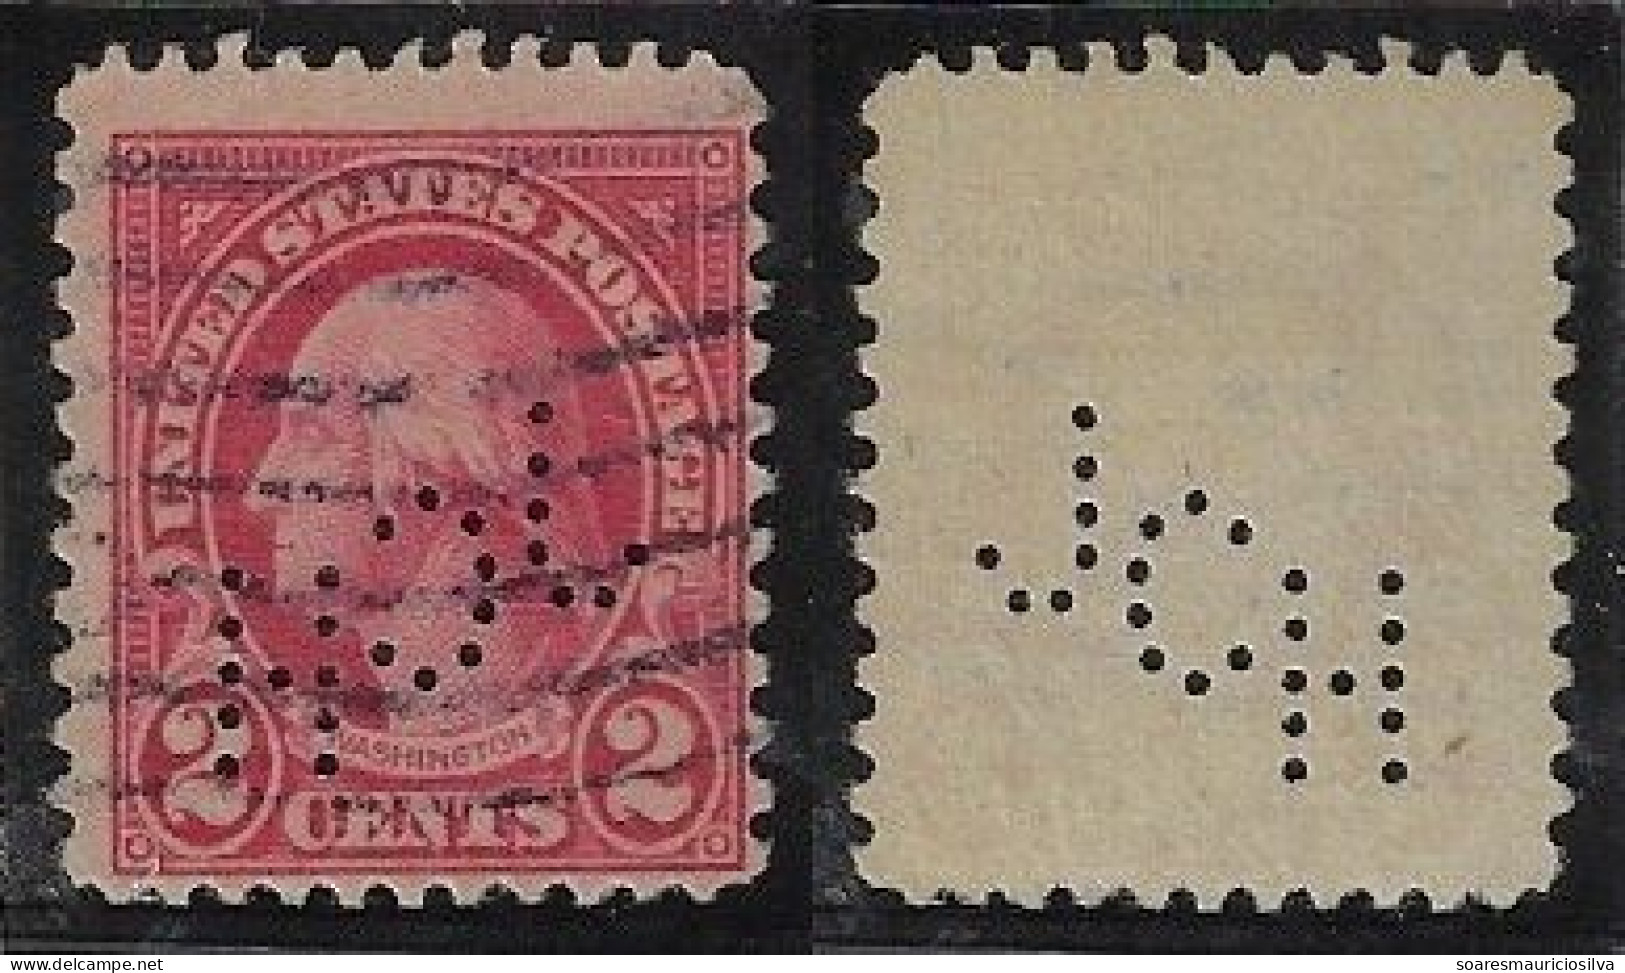 USA United States 1922/1940 Stamp With Perfin JCH By John C. Hoof Company From Chicago Lochung Perfore - Perforés